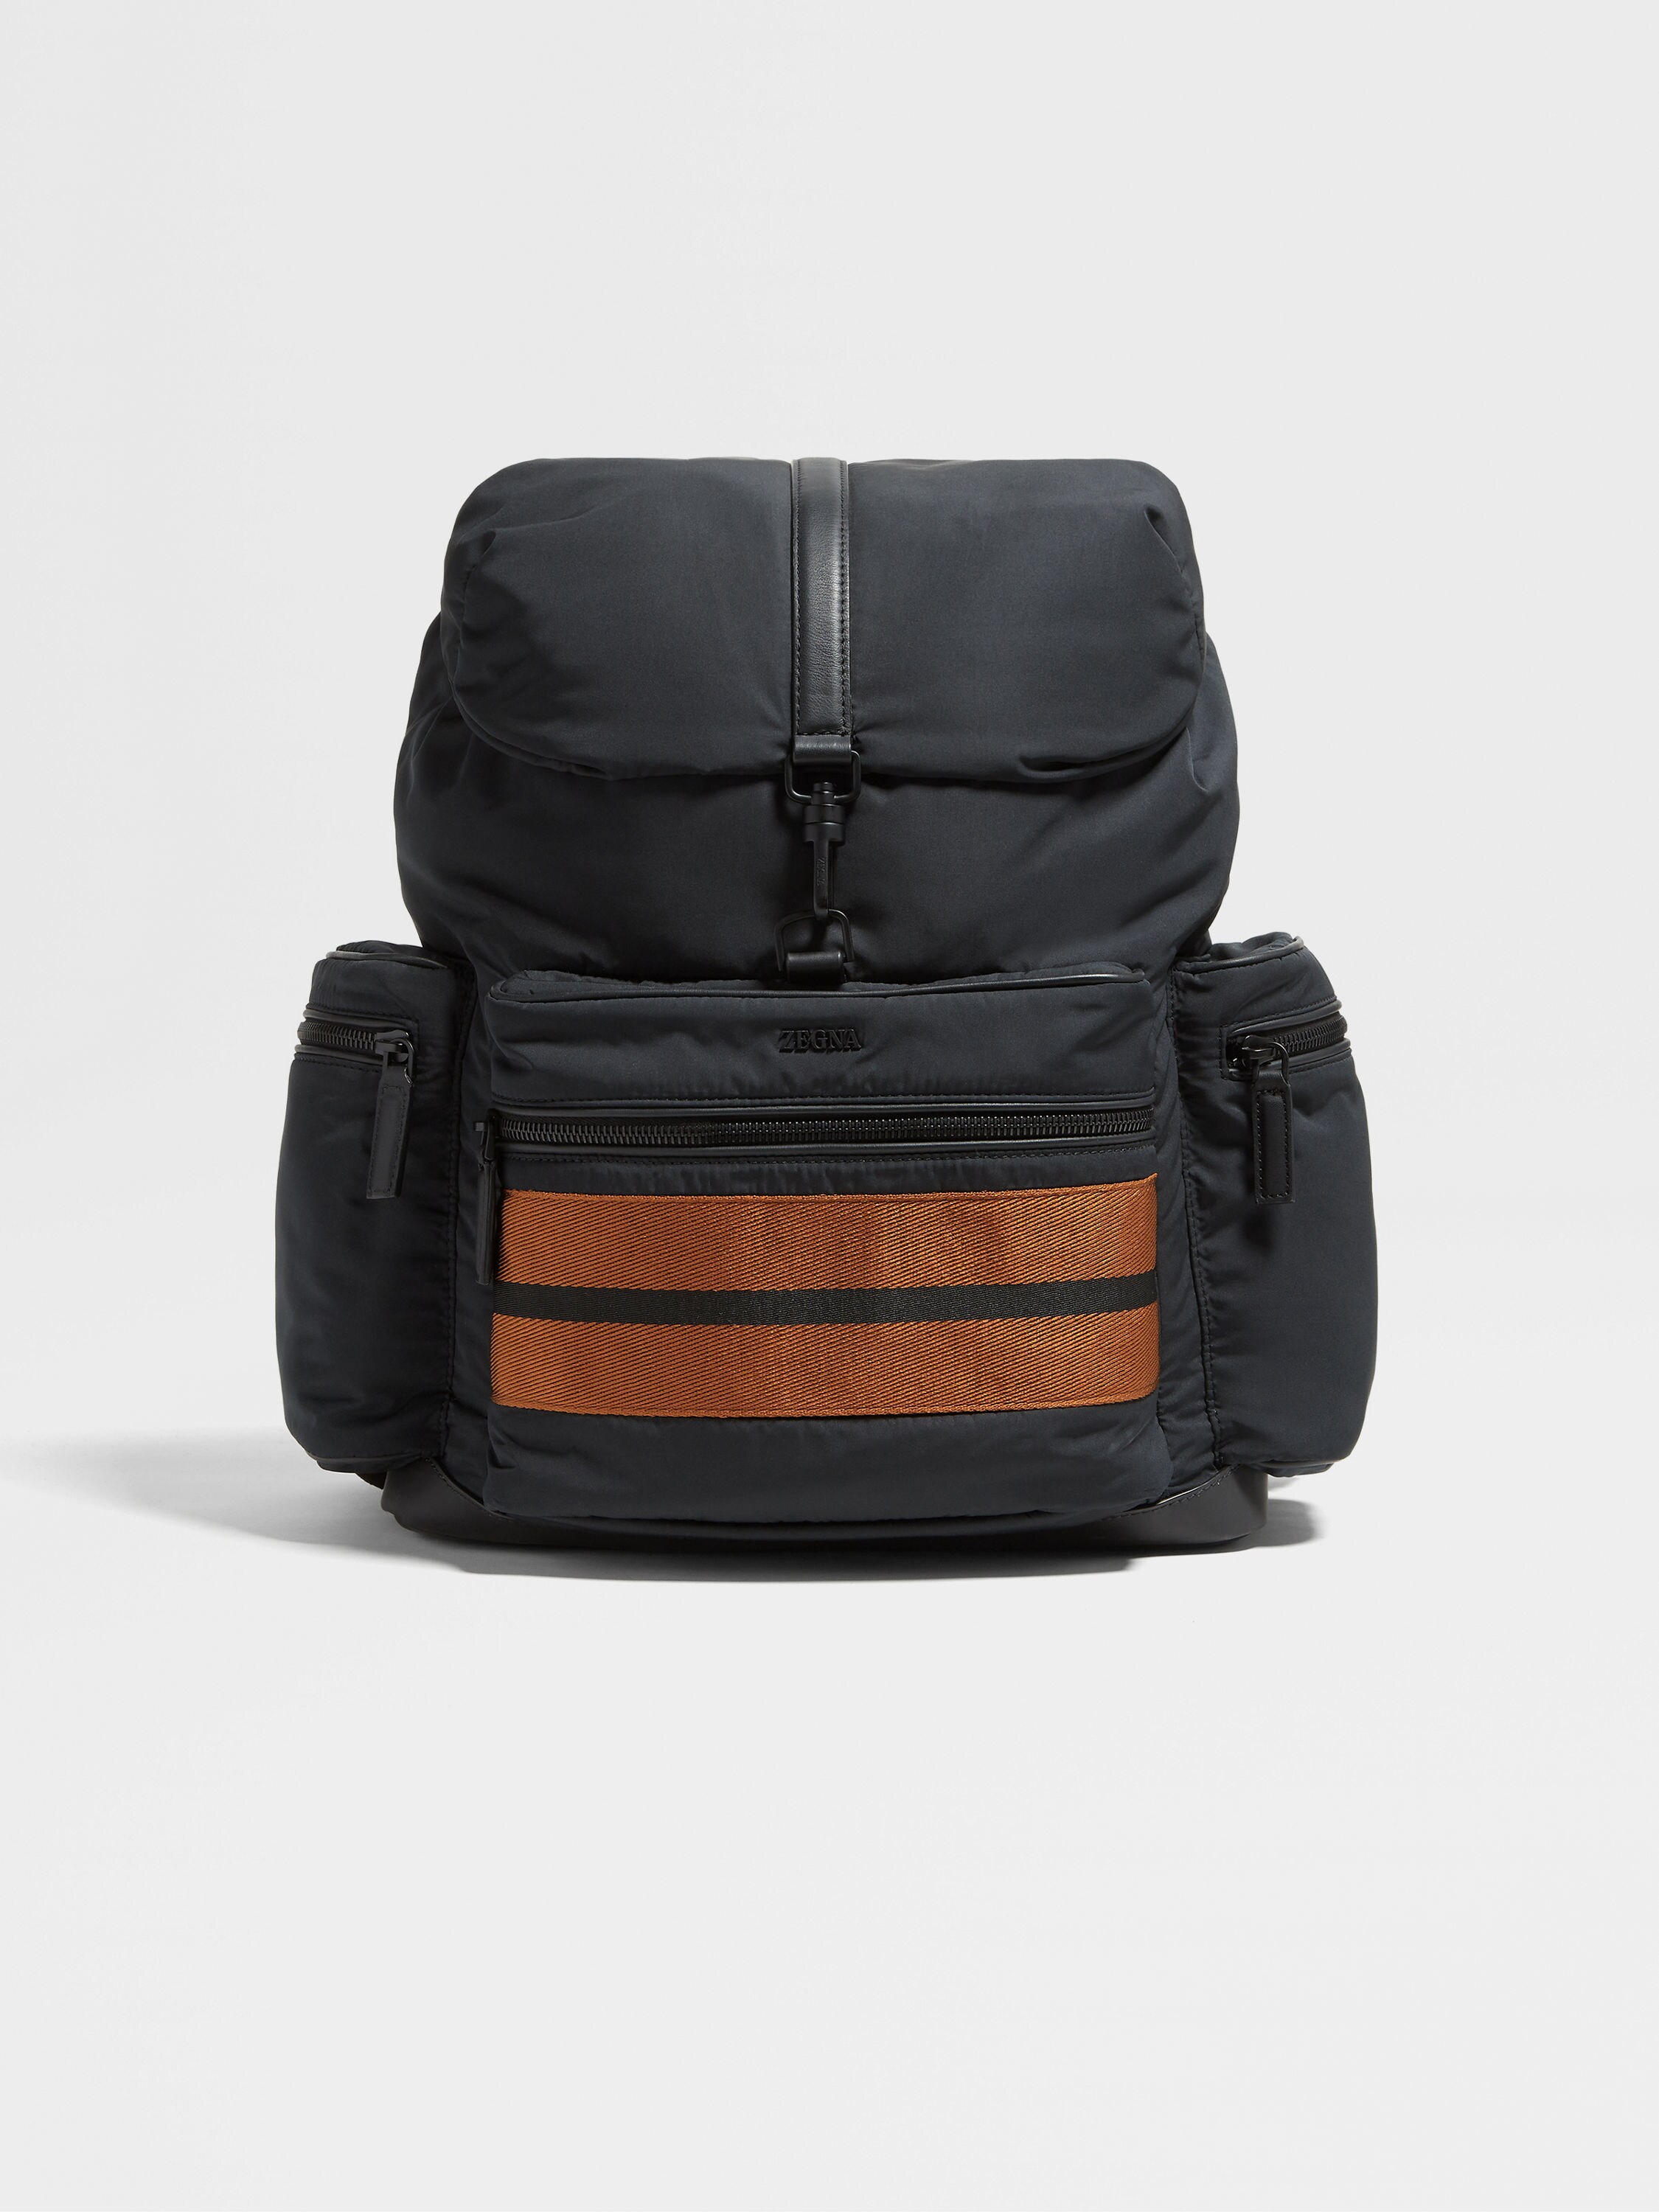 Black Technical Fabric Special Backpack FW24 22974497 | Zegna ROW